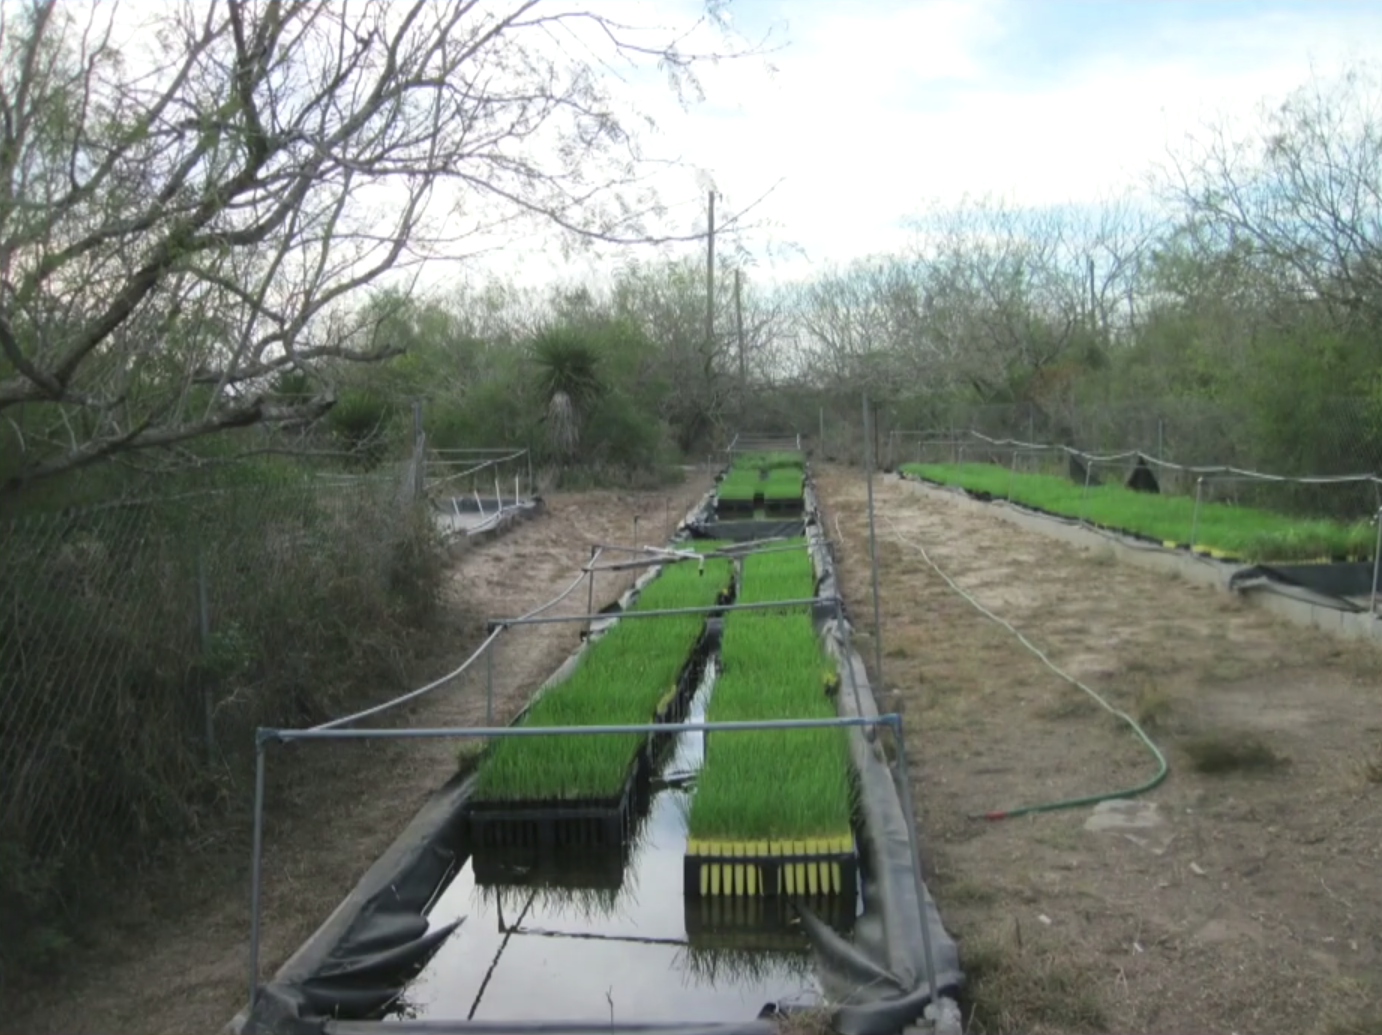 Containers of grass plugs lay along trench lines awaiting planting.